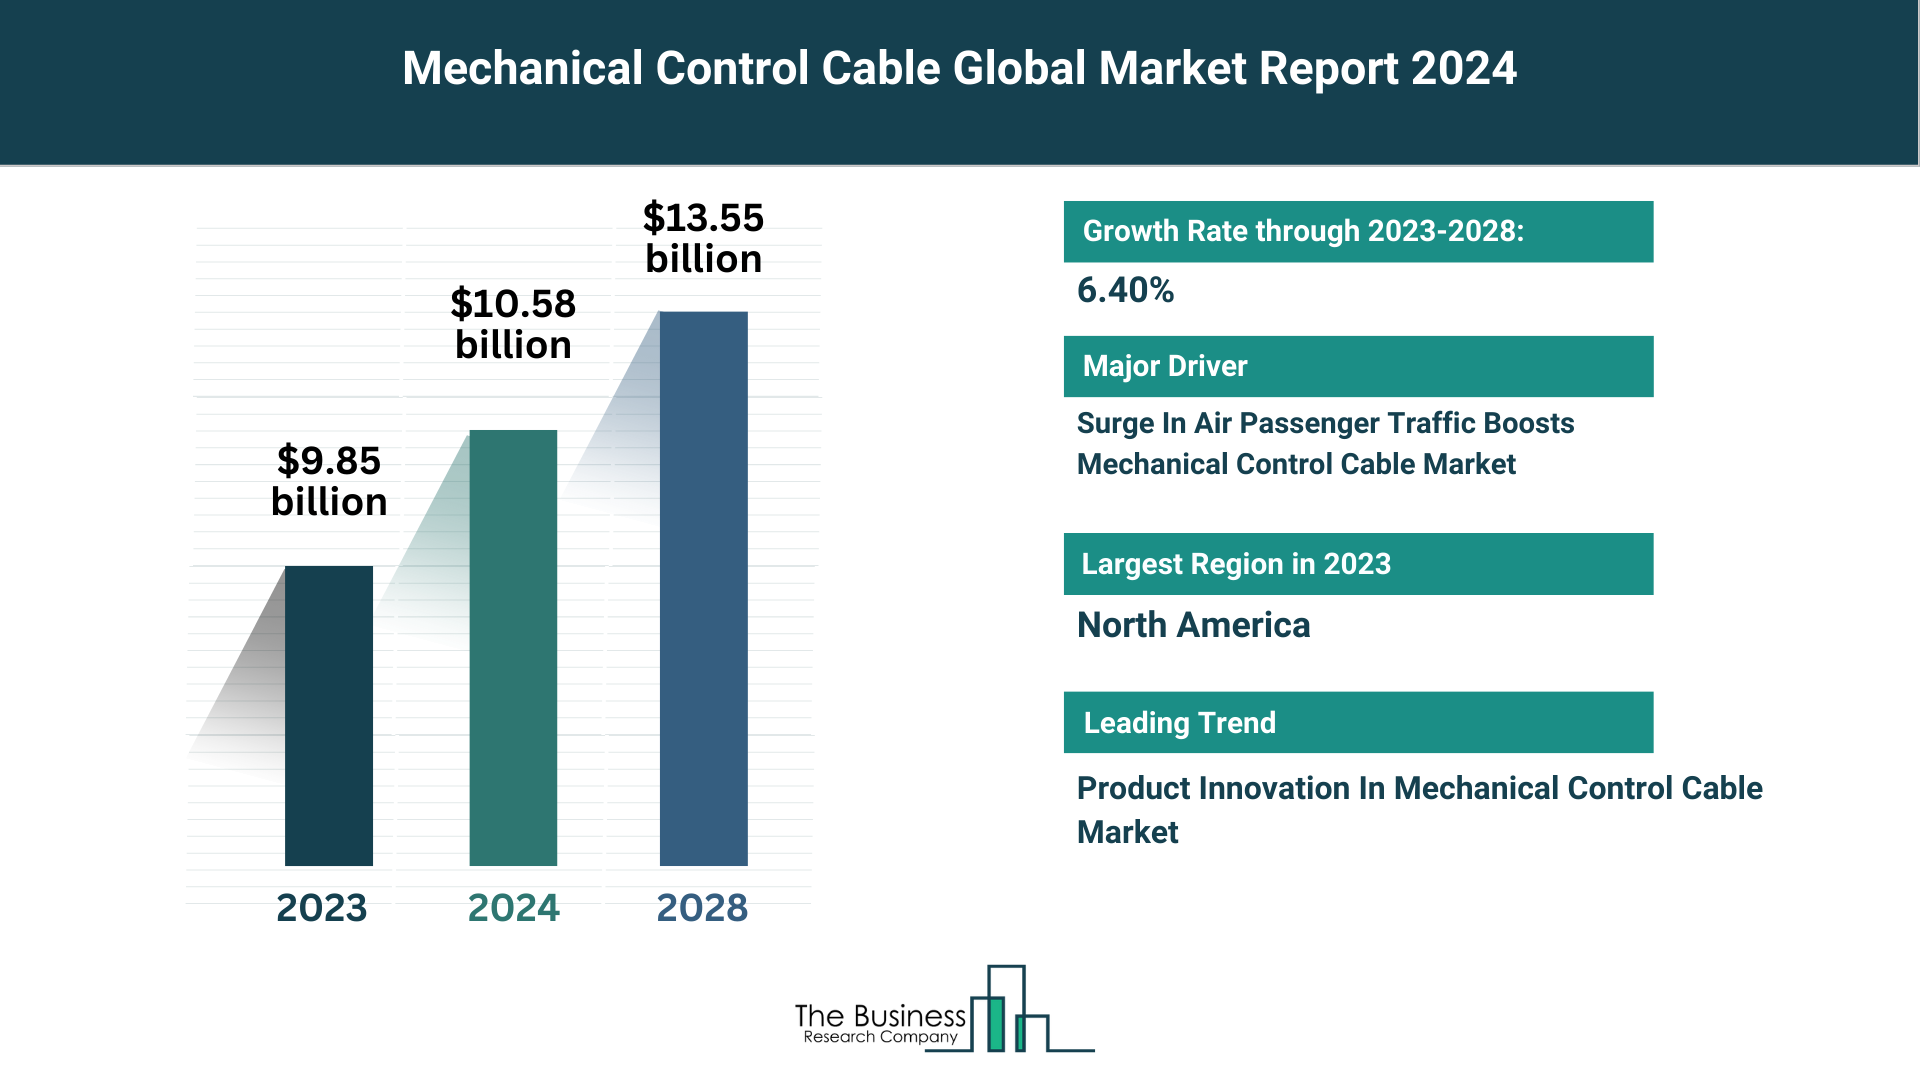 Mechanical Control Market Overview: Market Size, Major Drivers And Trends